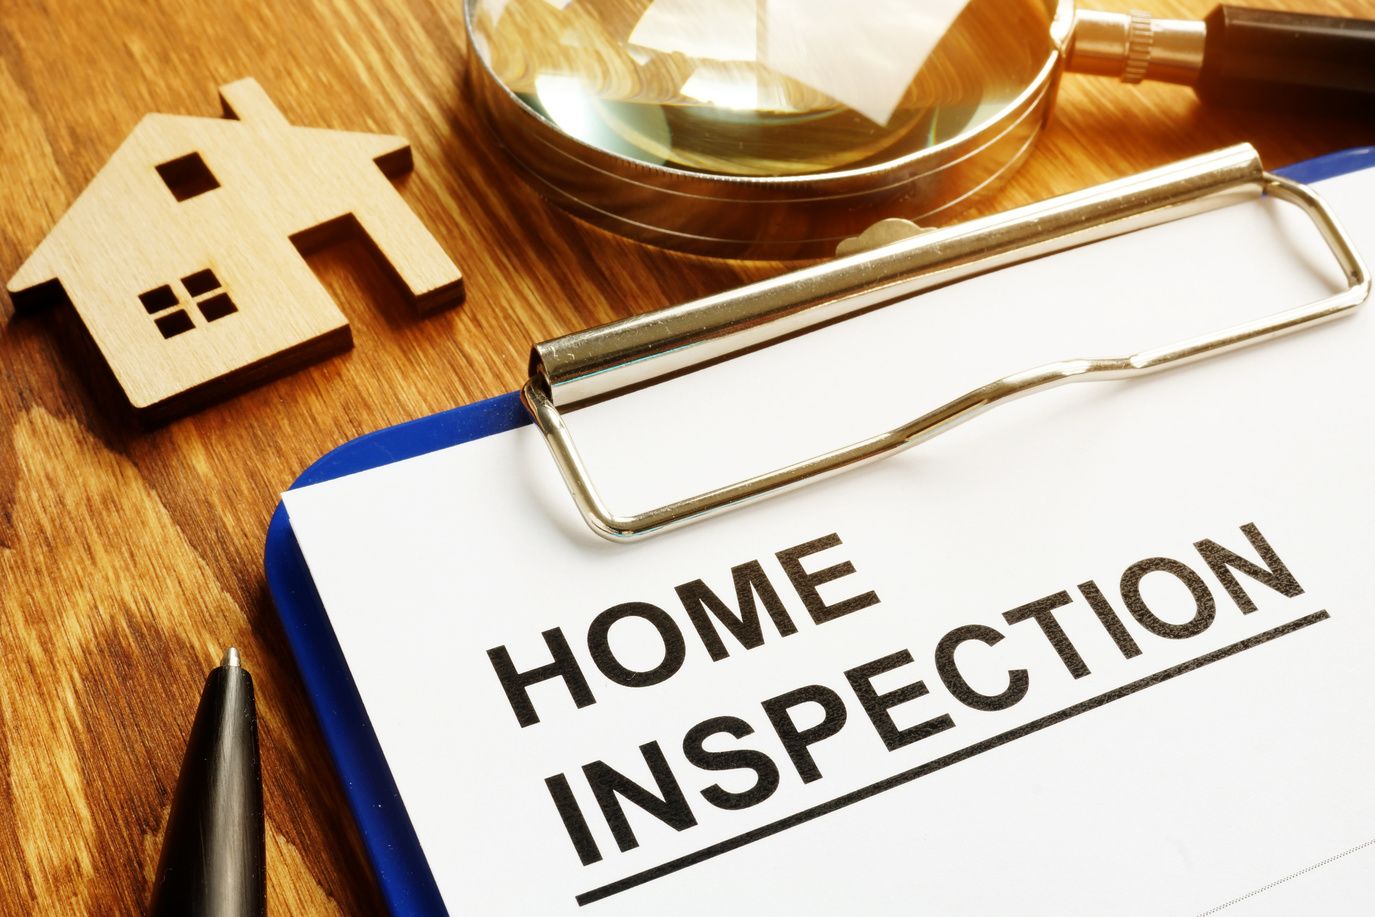 How To Start a Home Inspection Business #2 - damianmartinez.com